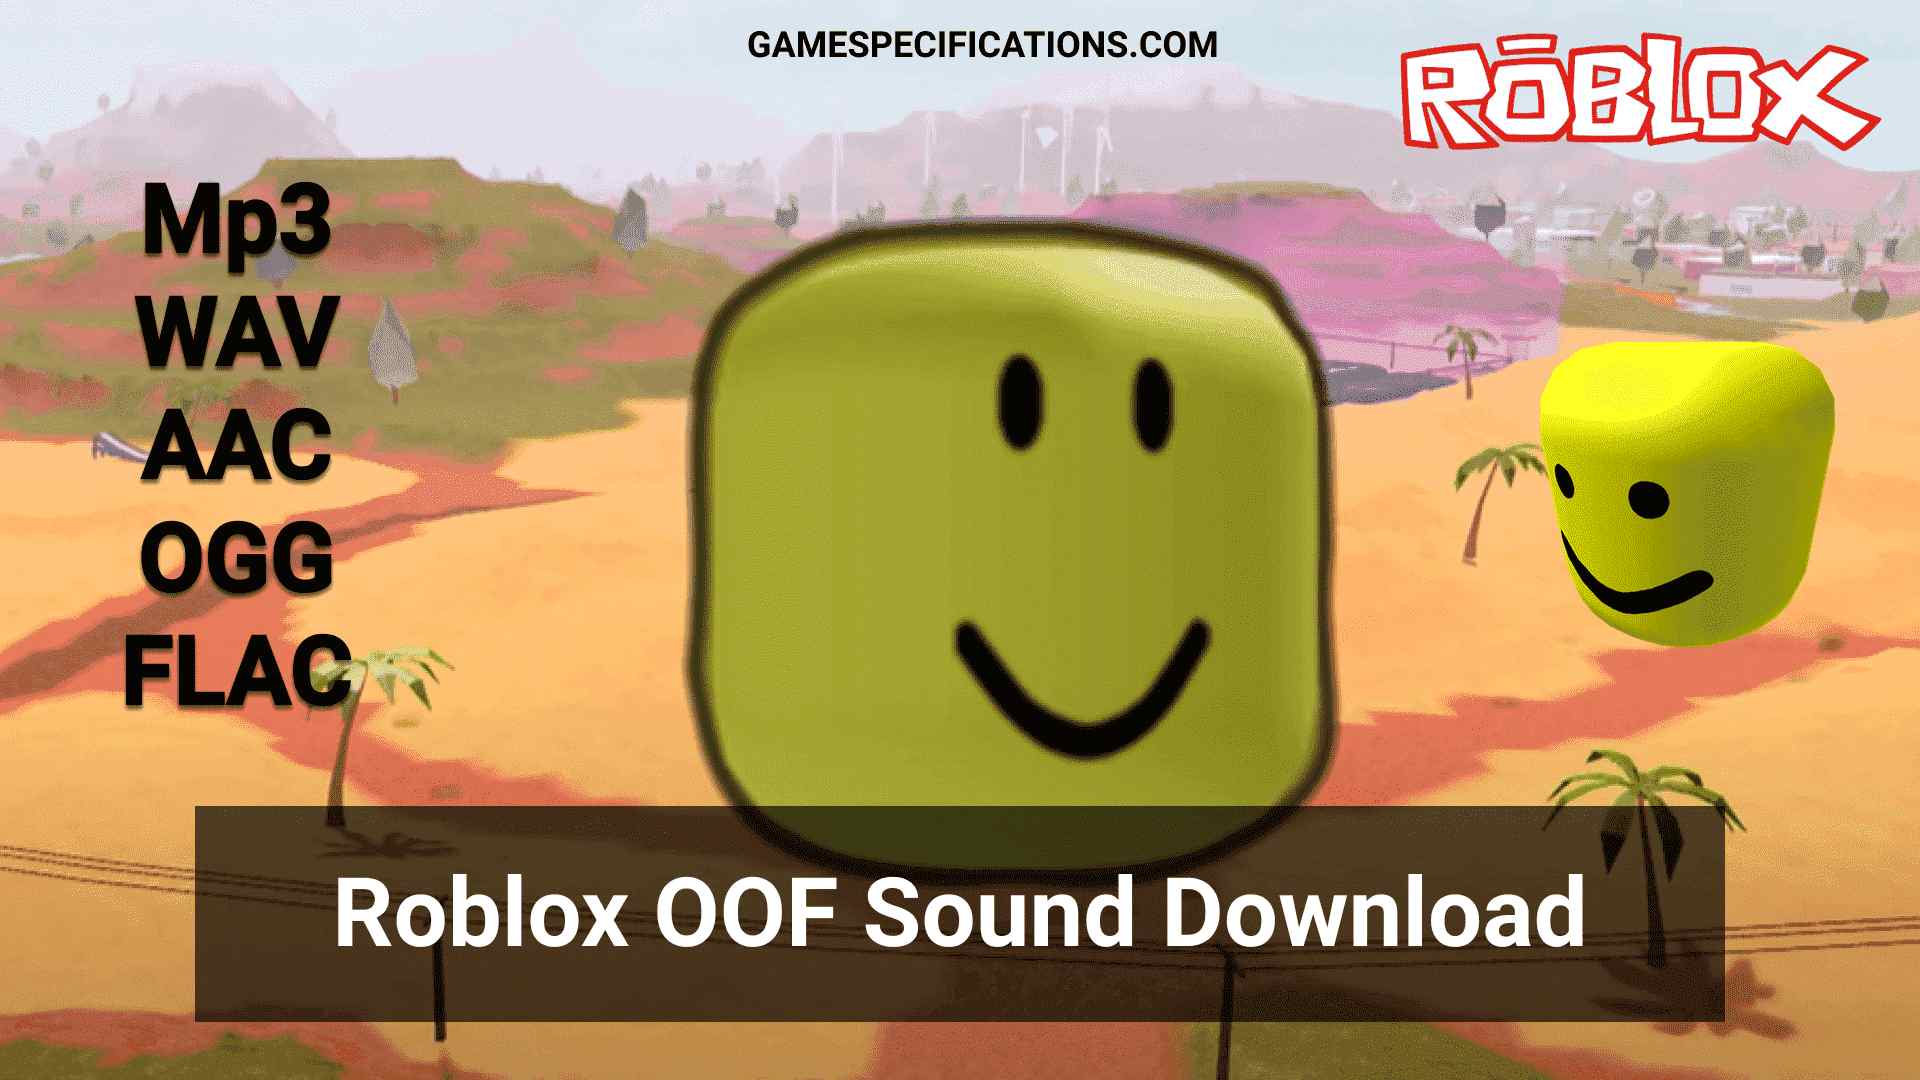 Roblox OOF Sound Download Mp3, WAV, AAC, FLAC, And OGG - Game Specifications